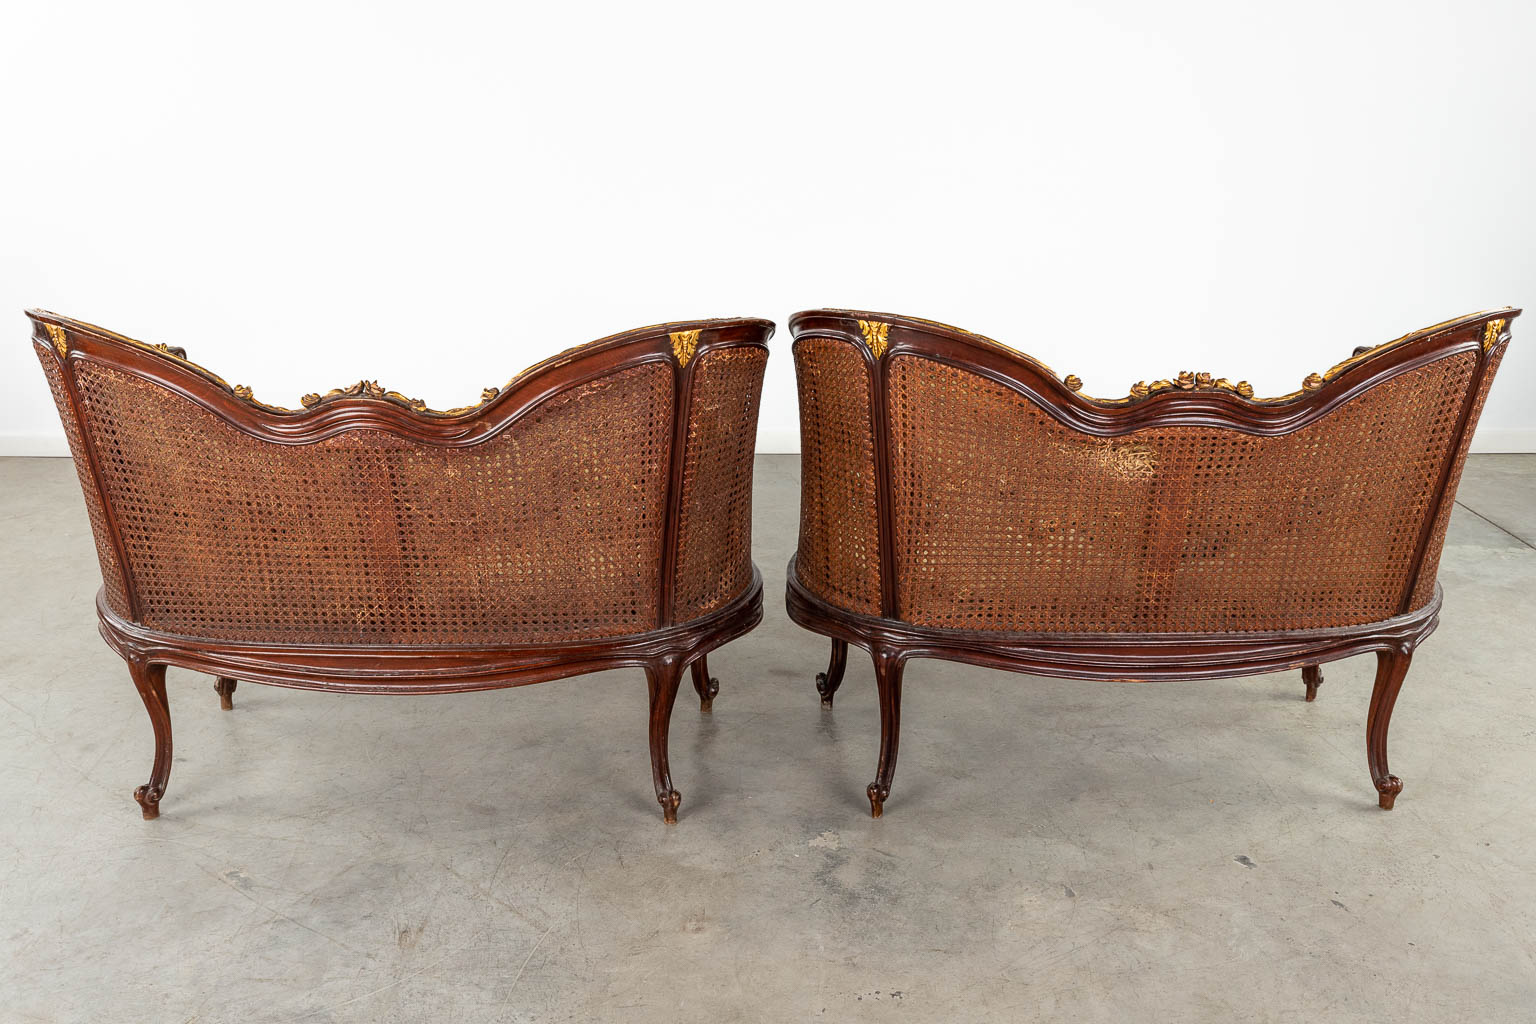 A pair of settee